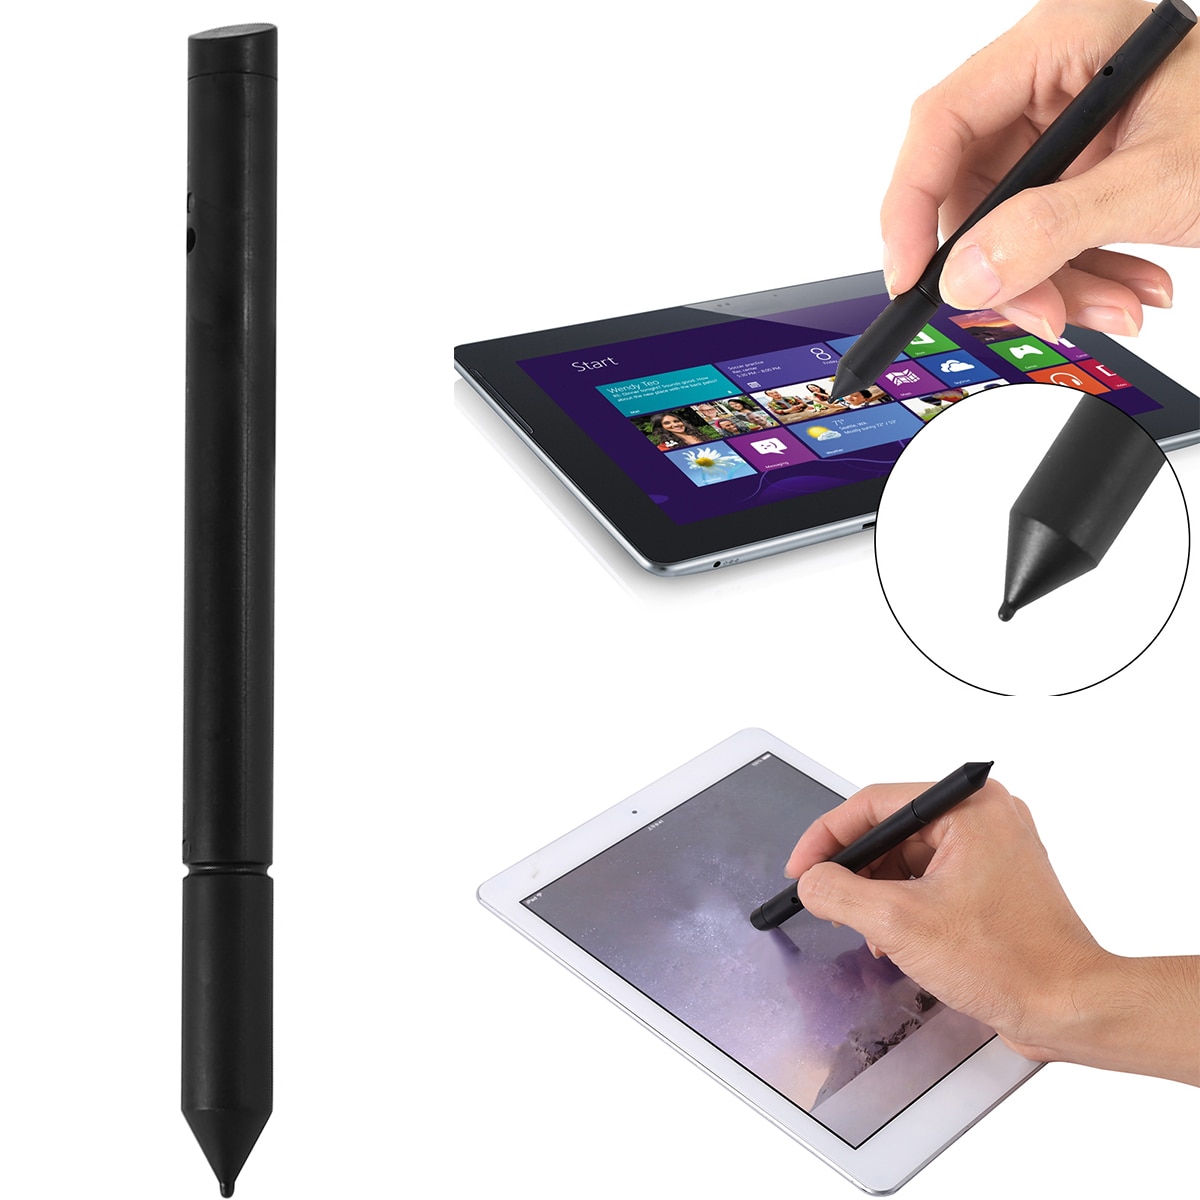 Stylus Pen 2In1 Touch Screen Pen Voor Samsung Tablet Telefoon PC Draagbare Touch Capacitieve Pen s